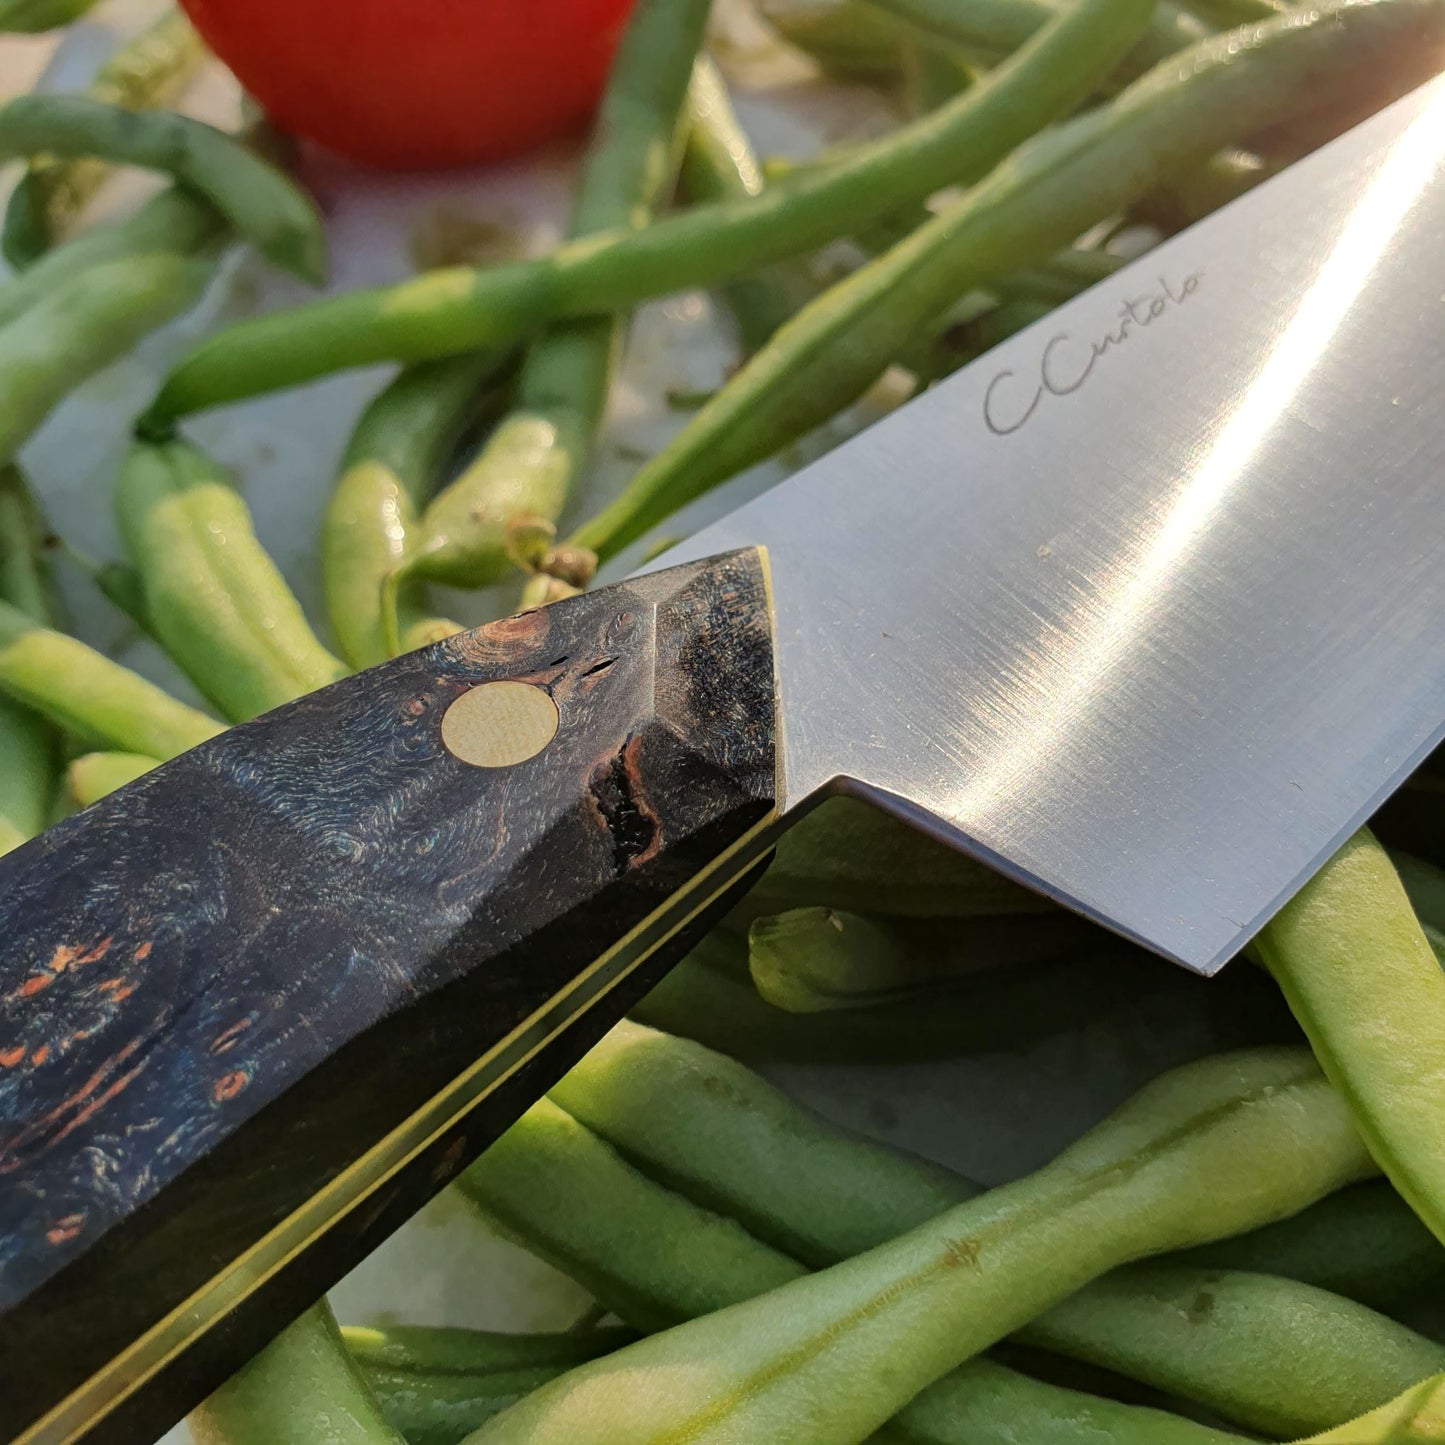 Chef's Knife (blue)